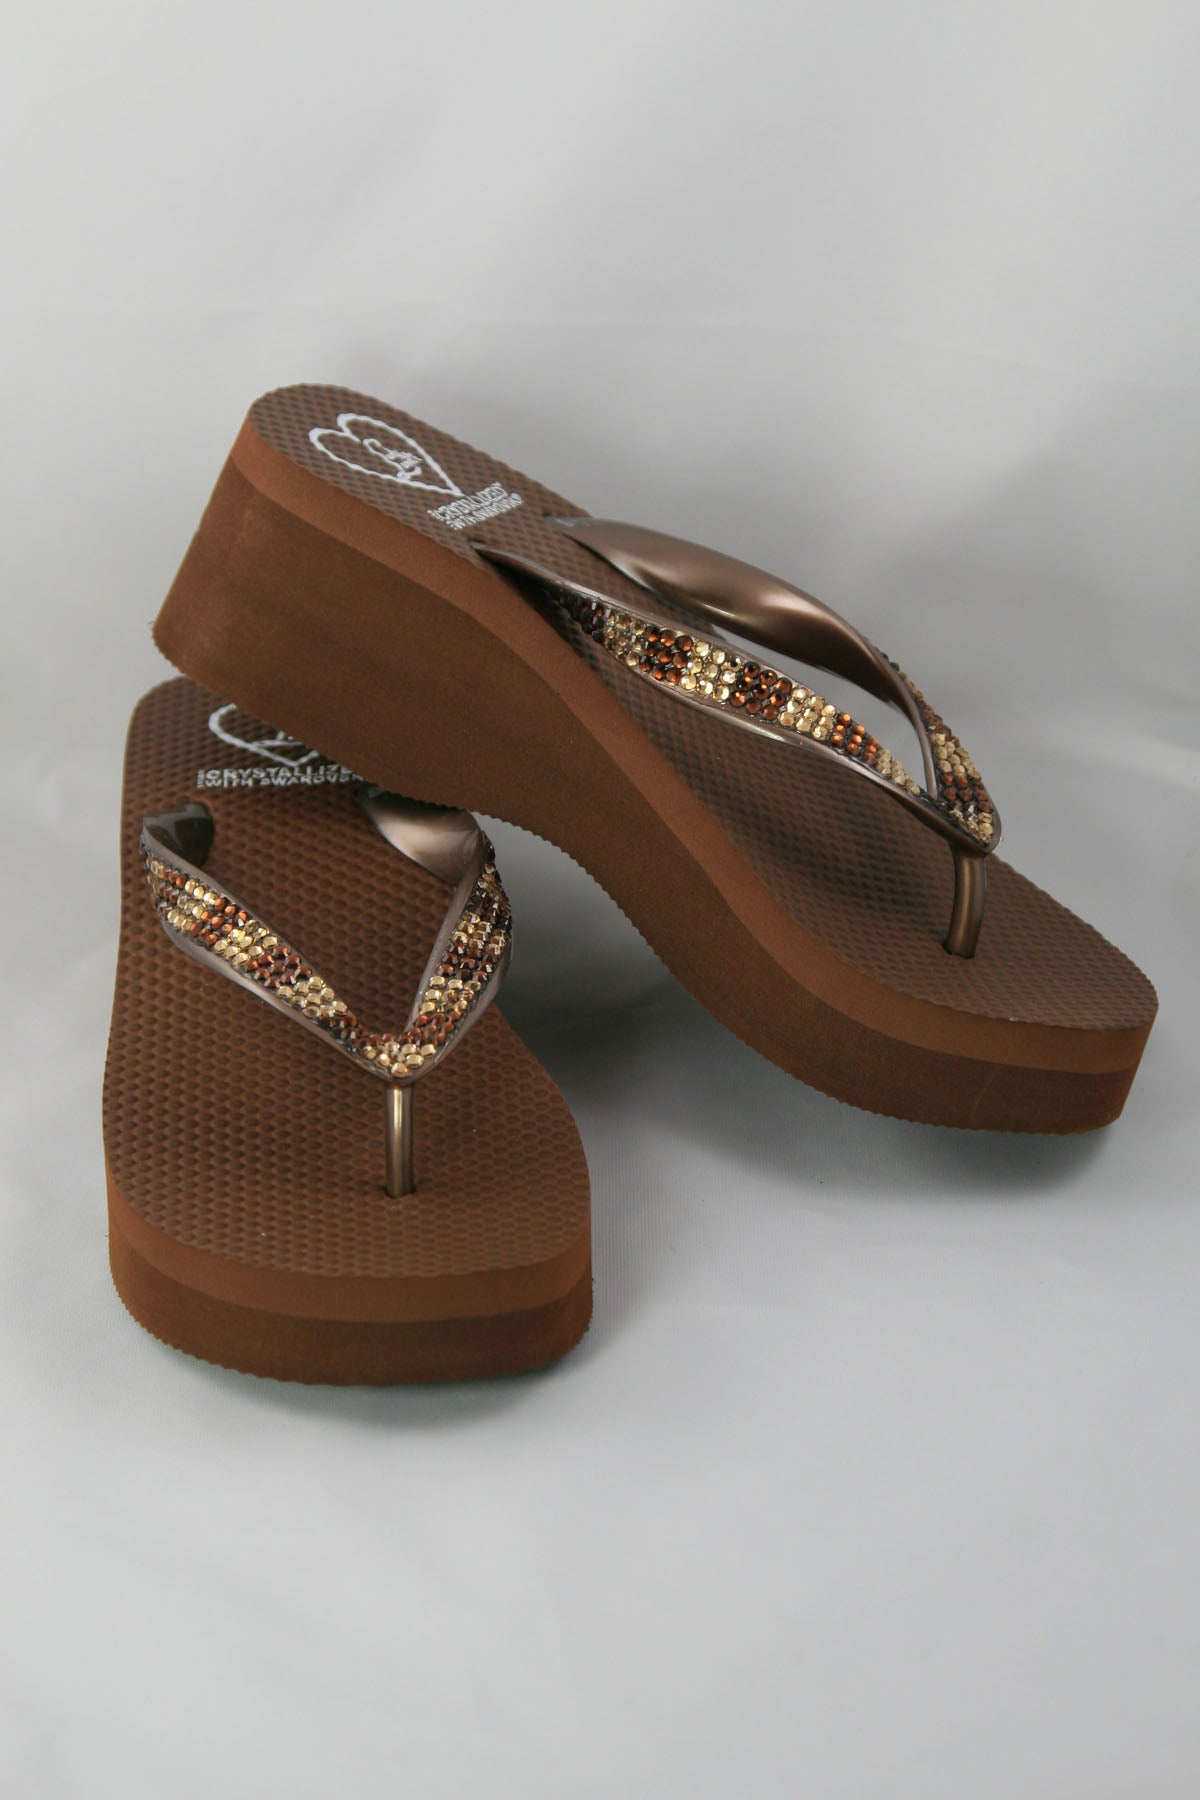 High Night Sandal in Chocolate with light colorado and smoke crystals